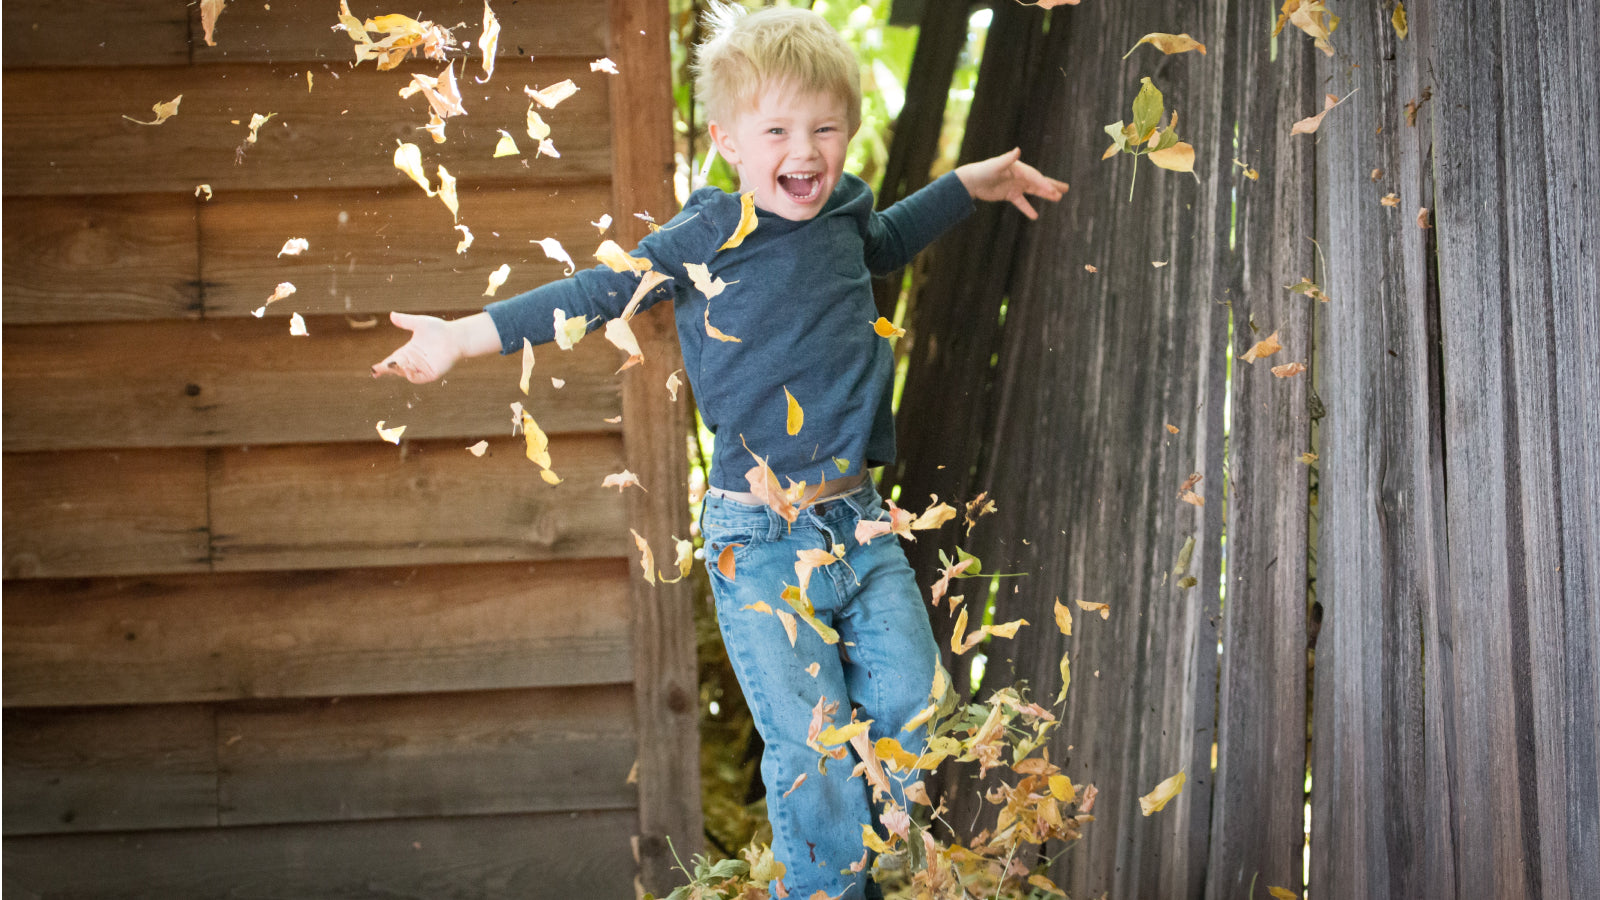 A young boy jumps in a leaf pile